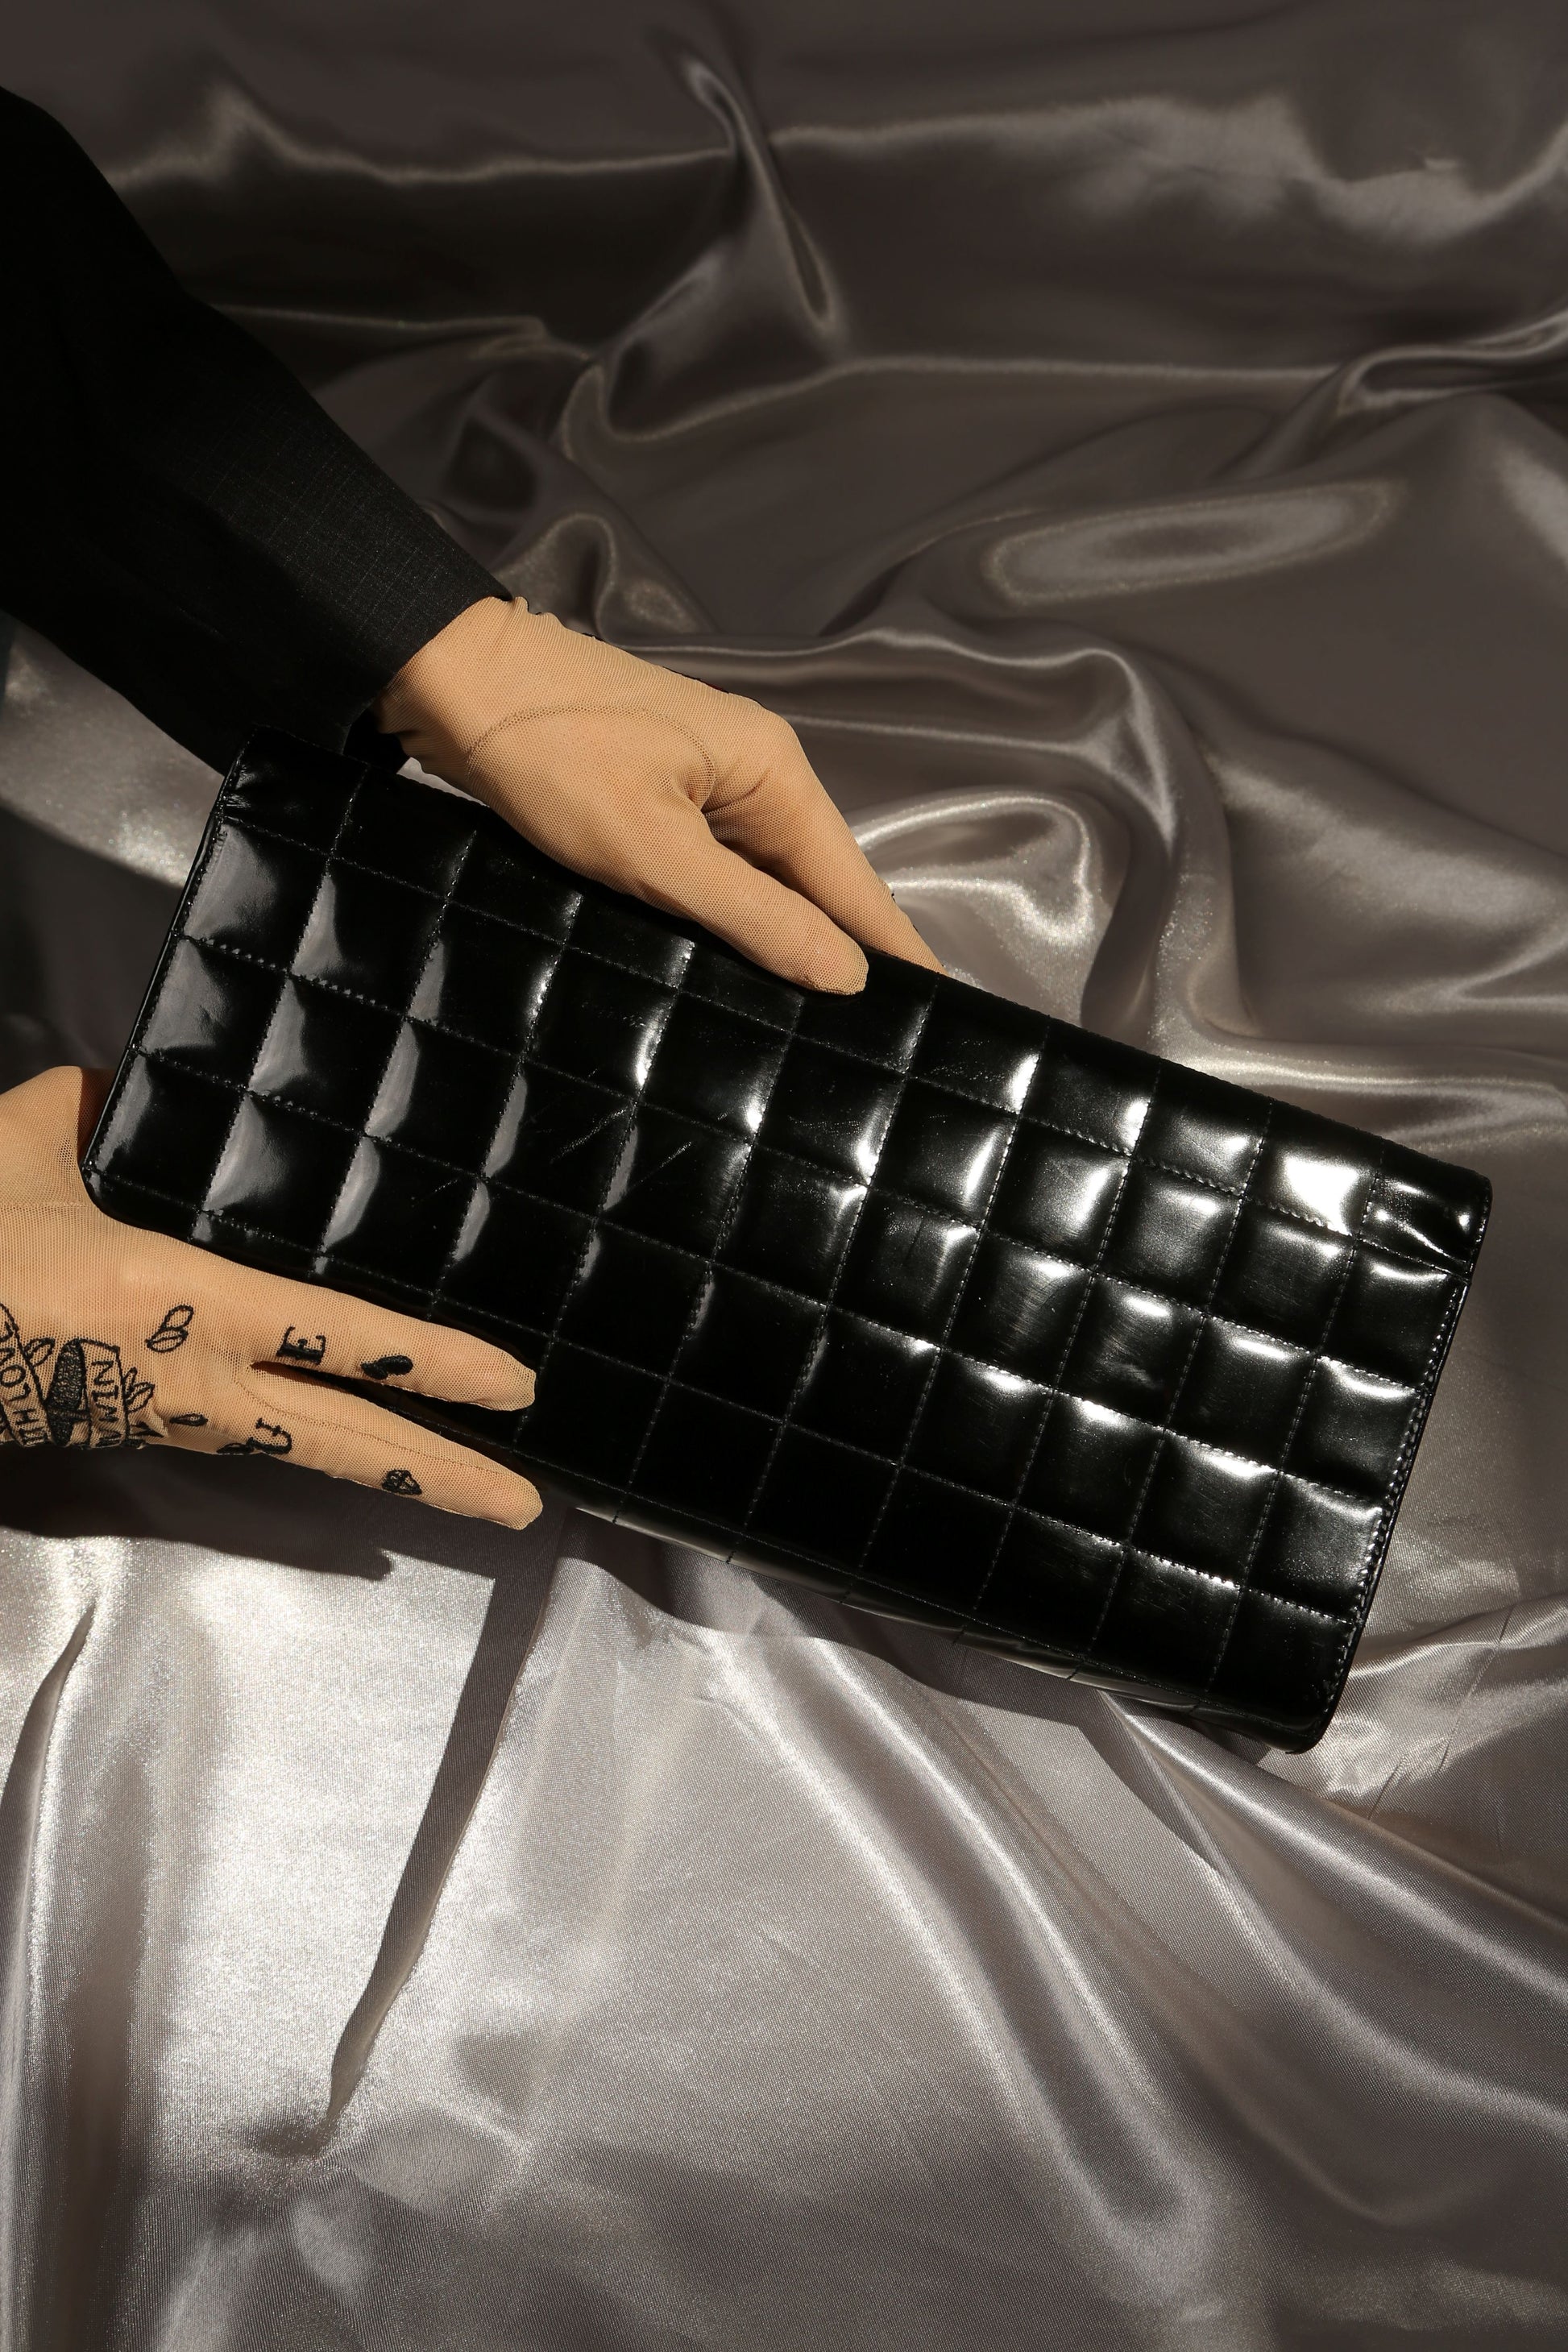 Extremely Rare CHANEL Chocolate Bar Clutch – Vintylux